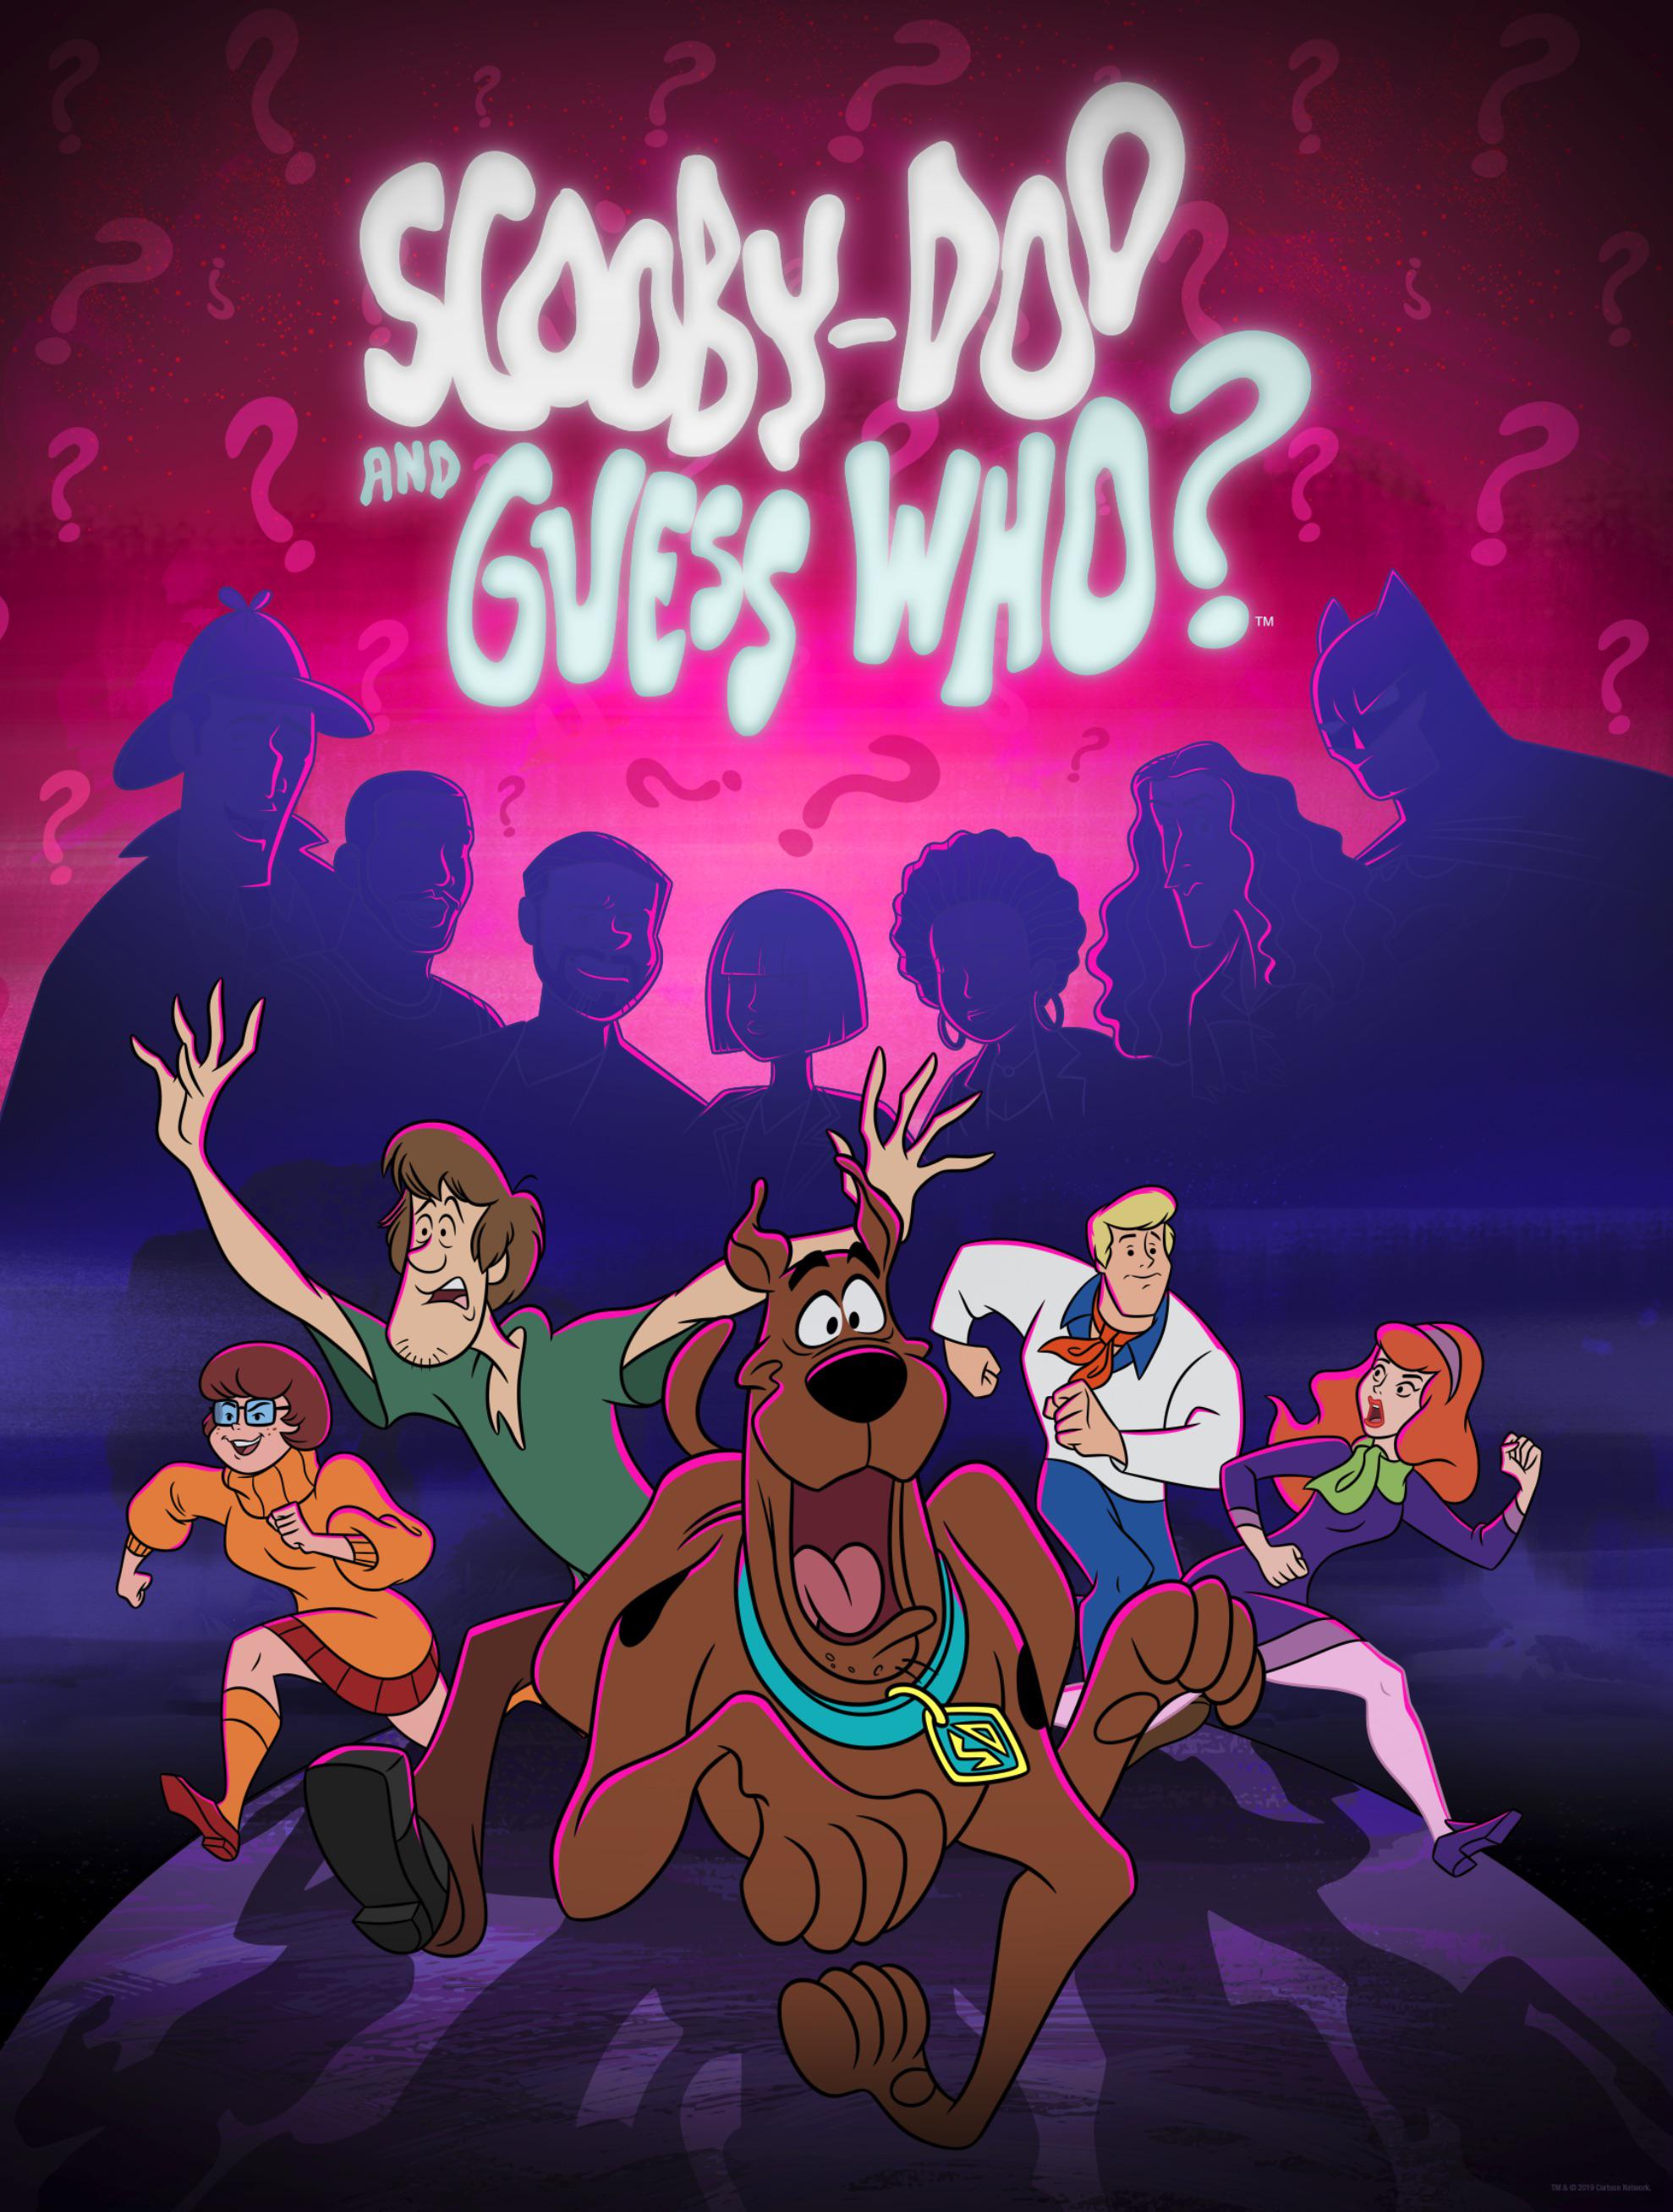 Scooby-Doo and Guess Who? - Season 4